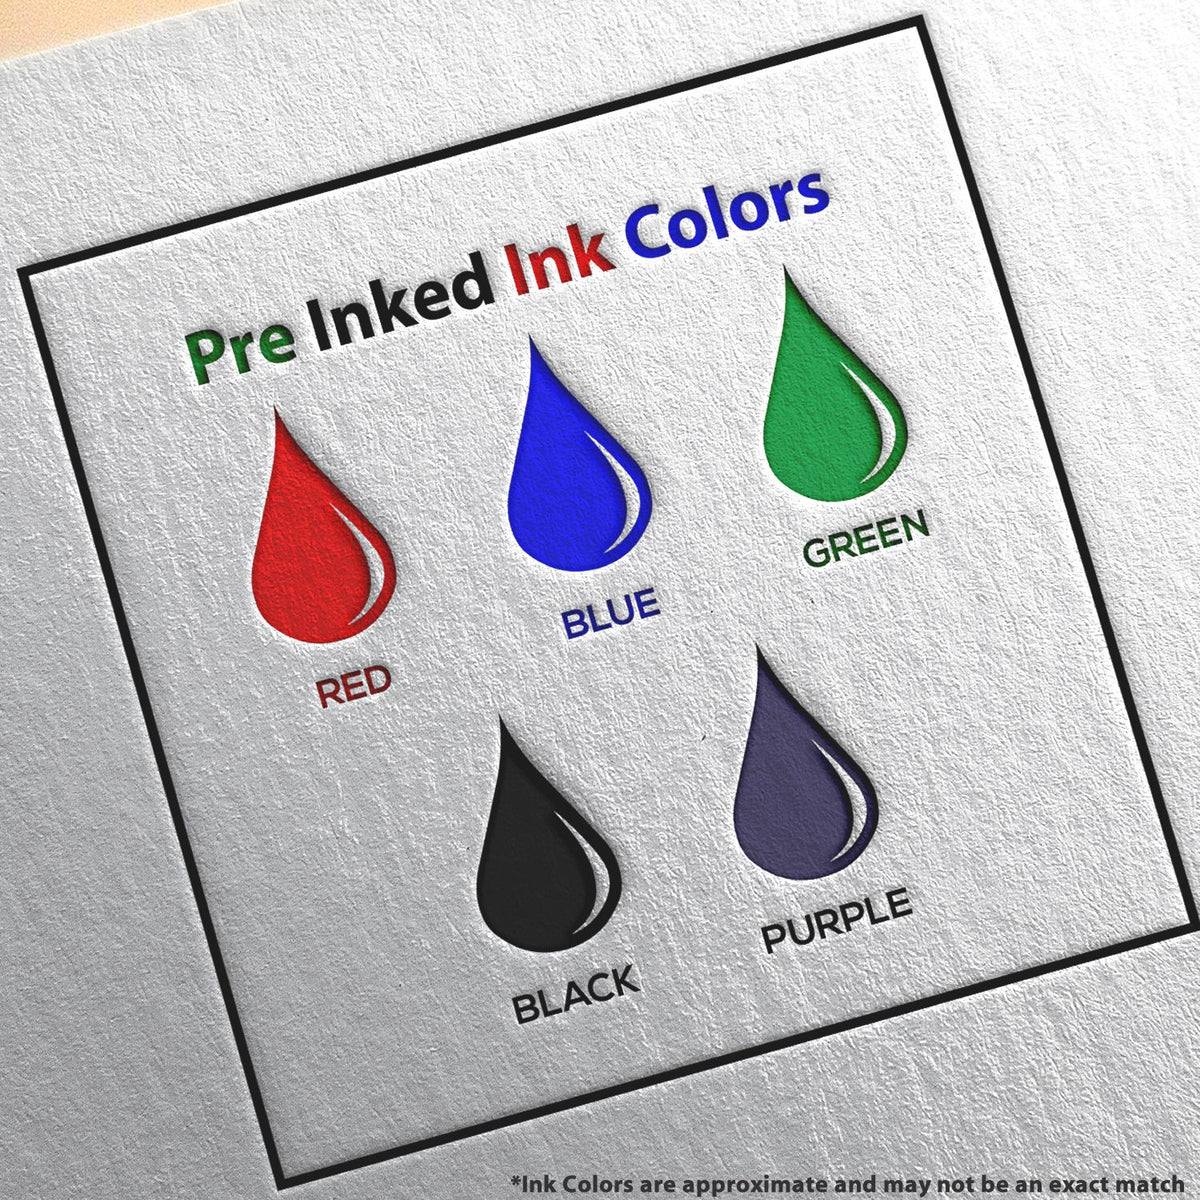 A picture showing the different ink colors or hues available for the Premium MaxLight Pre-Inked Missouri Engineering Stamp product.